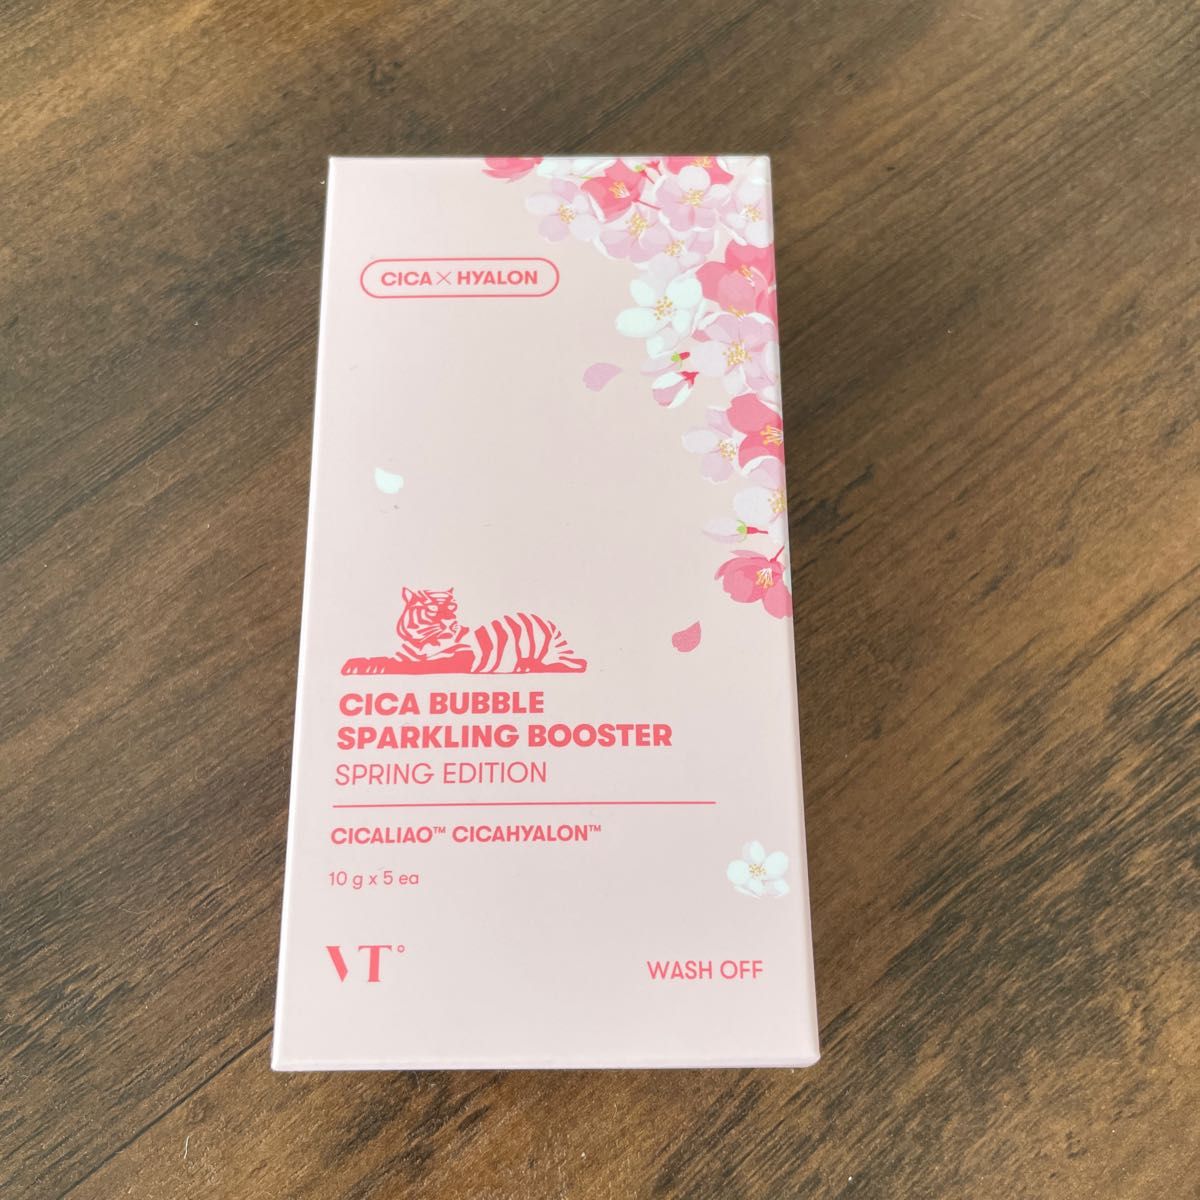 CICA BABBLE SPARKLING BOOSTER